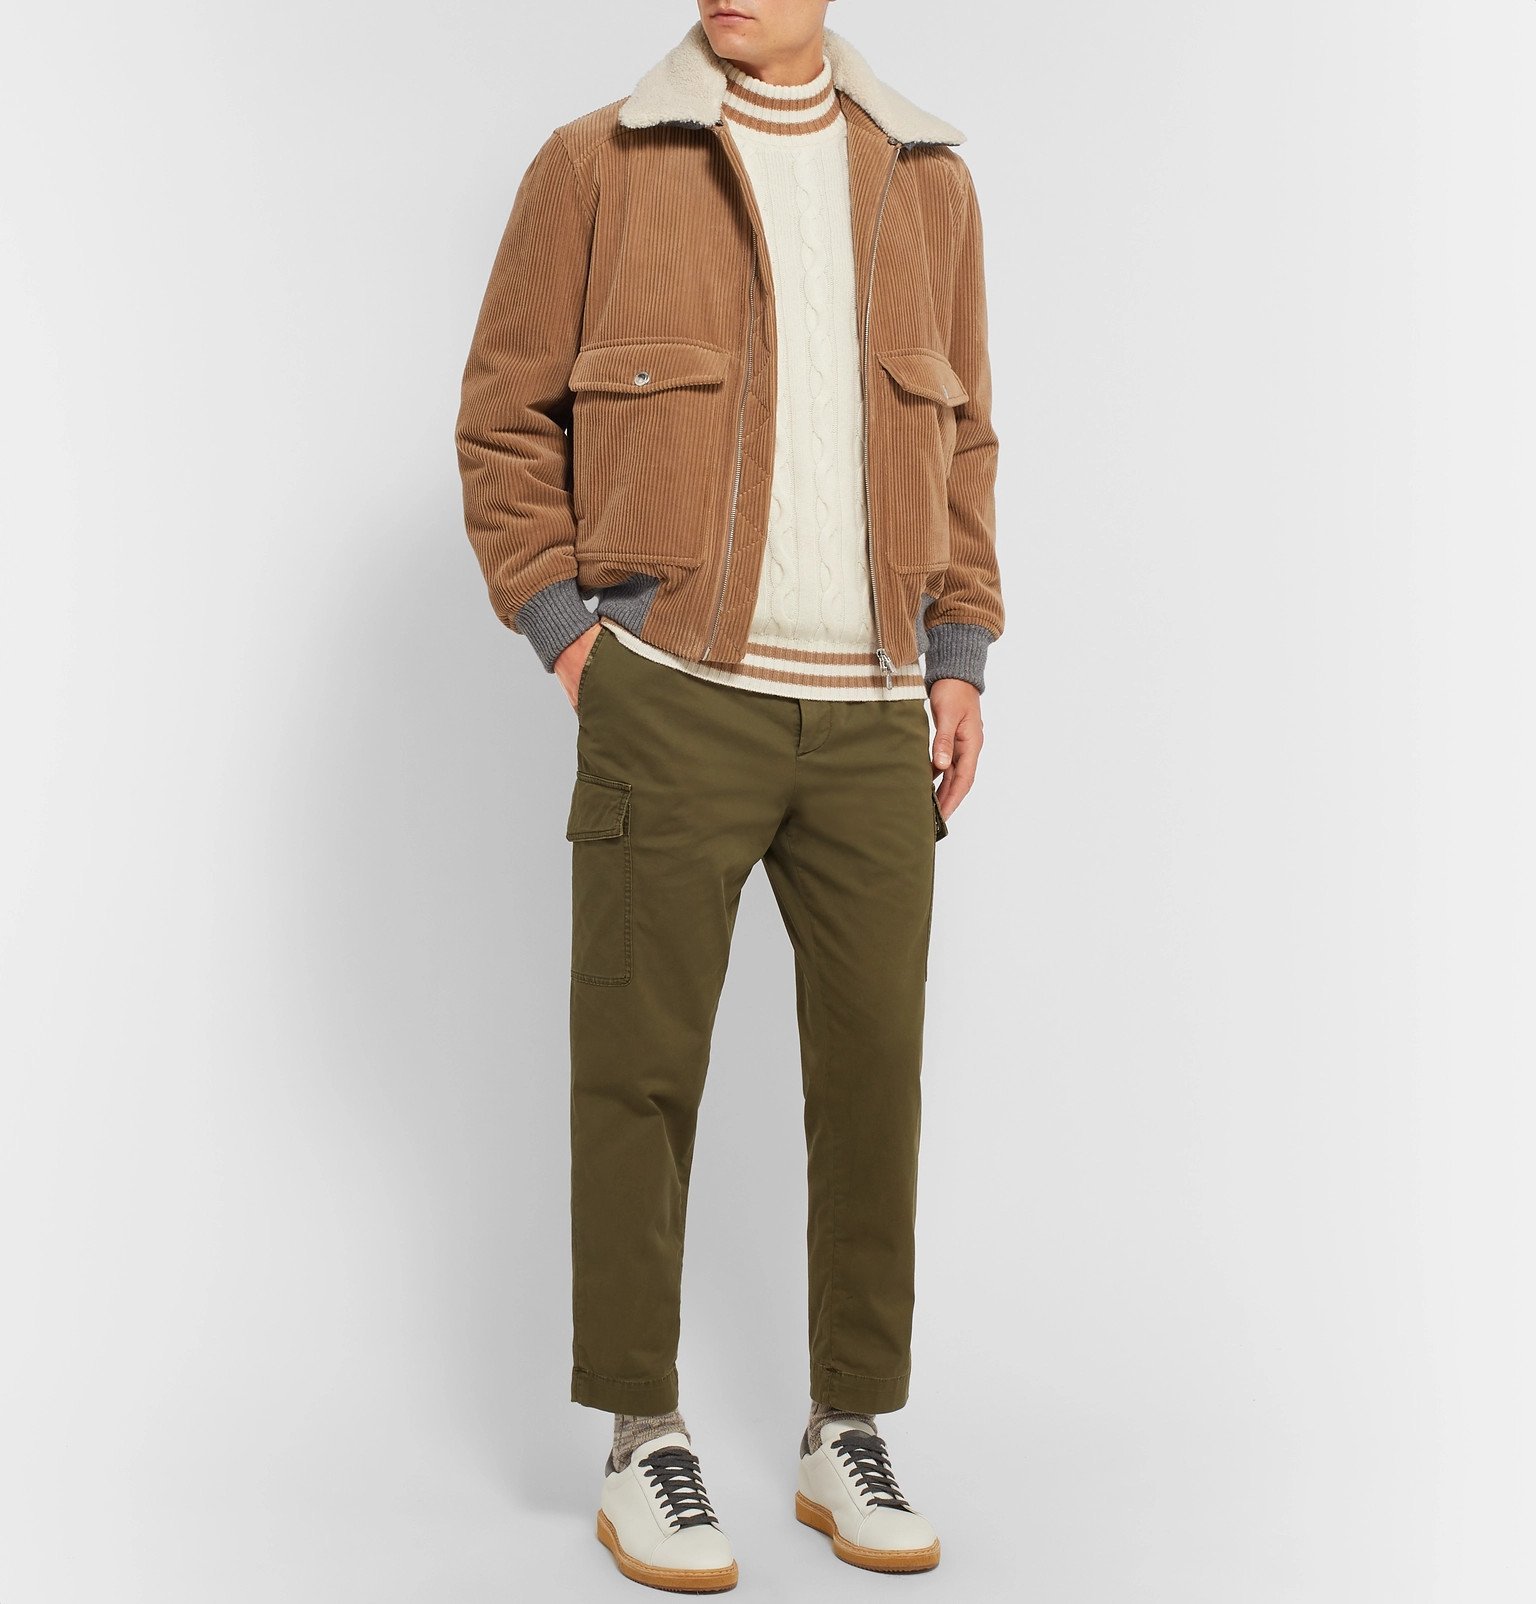 Brunello Cucinelli - Shearling-Trimmed Cotton and Cashmere-Blend ...